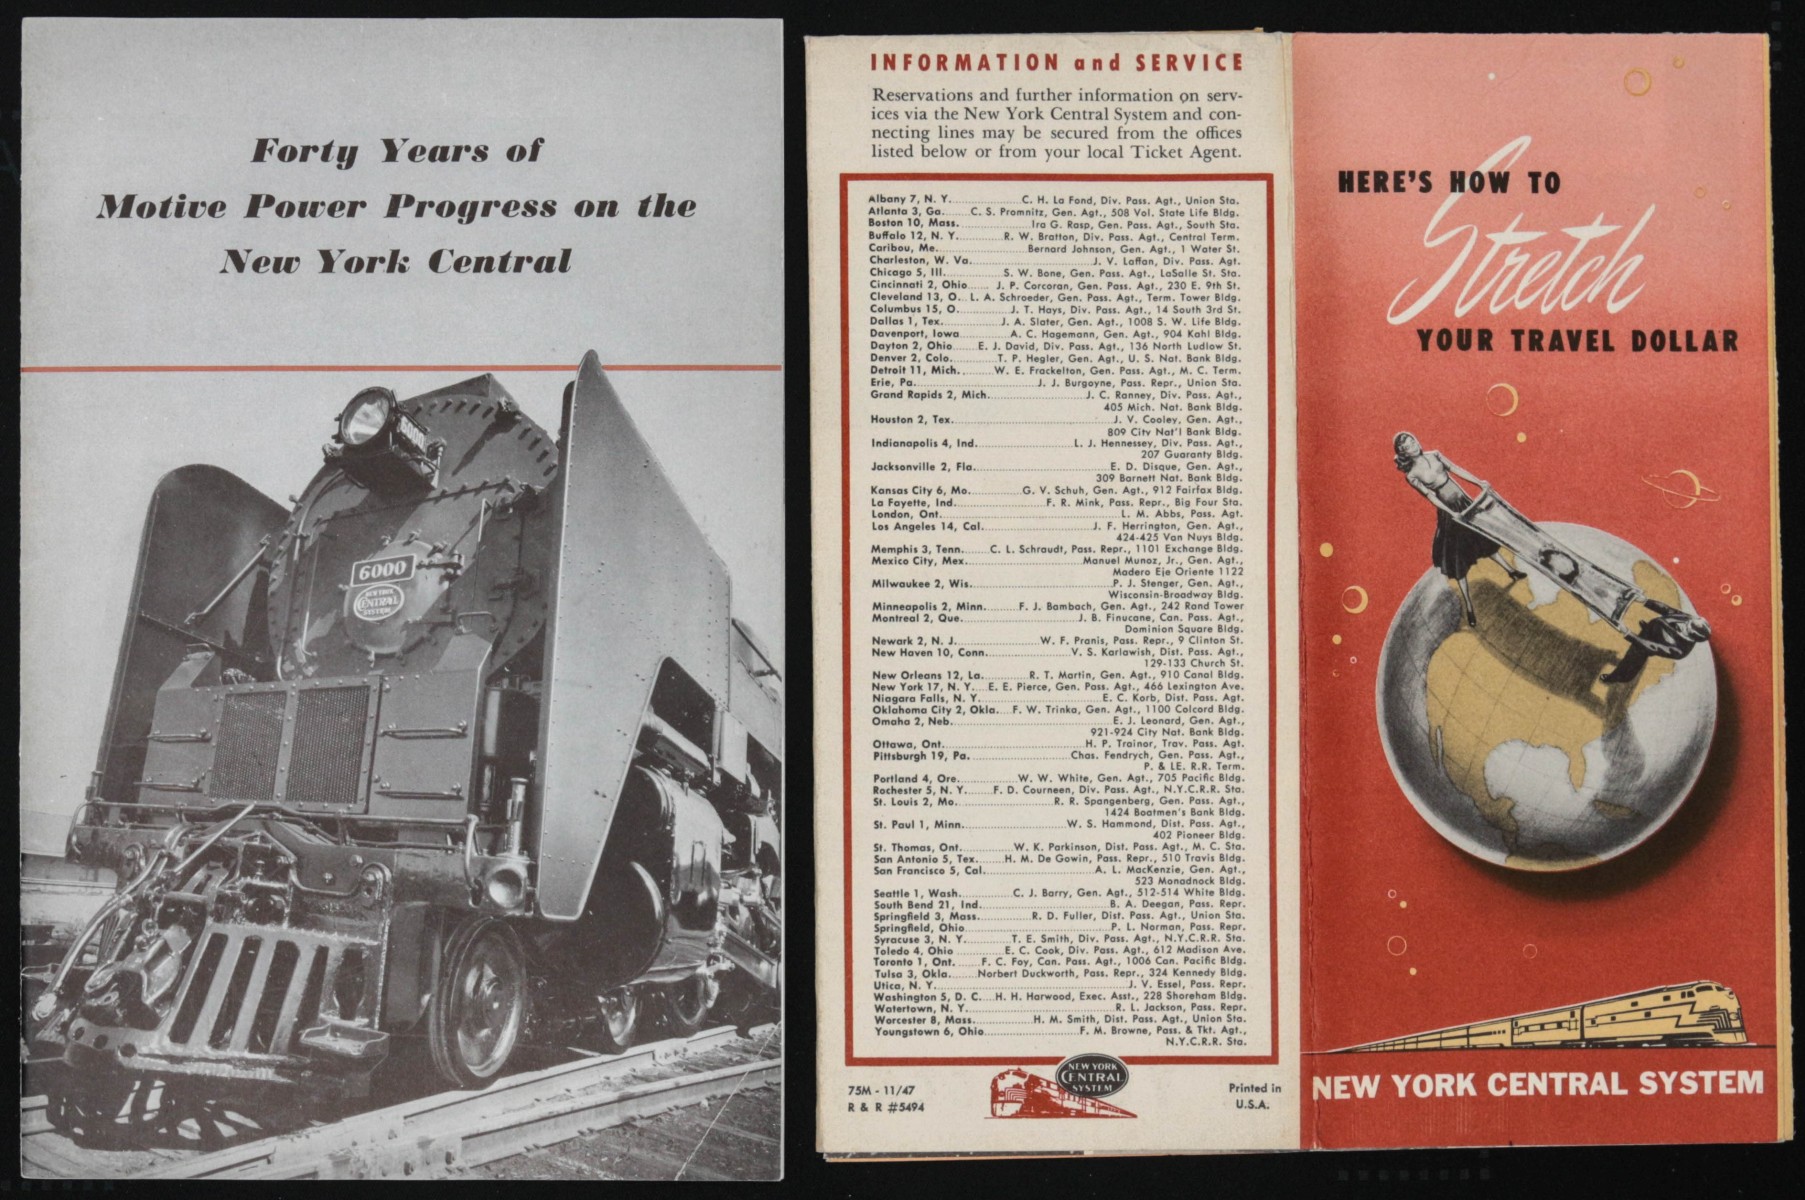 A COLLECTION OF N.Y.C.R.R. TIME TABLES, BROCHURES